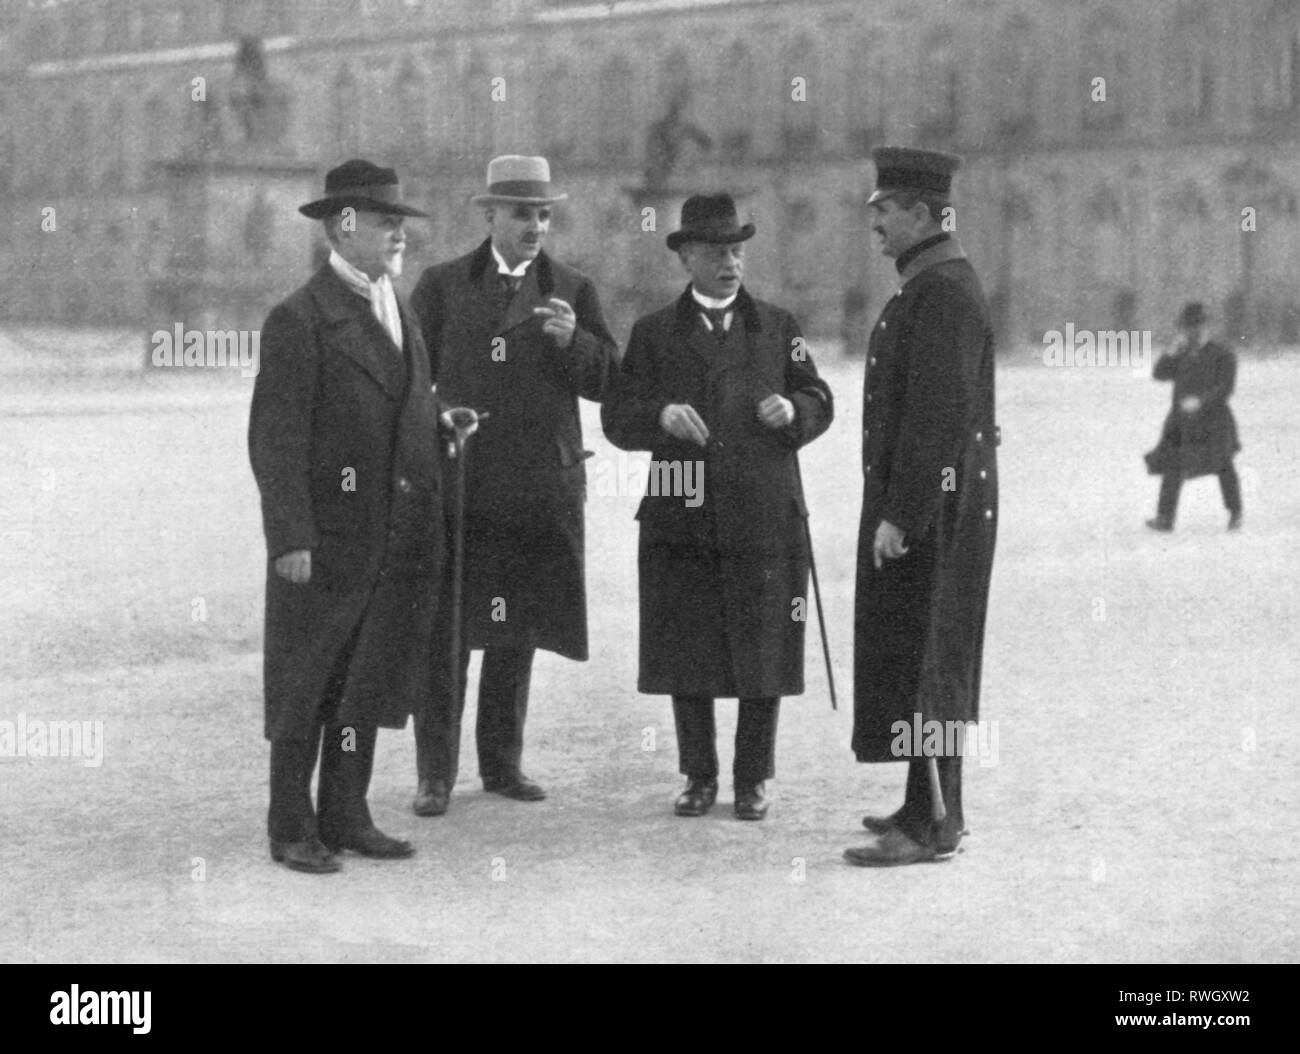 Scheidemann, Philipp, 26.7.1865 - 29.11.1939, German politician (SPD), full length, with colleagues on way the to the National Assembly, Weimar, February 1919, Additional-Rights-Clearance-Info-Not-Available Stock Photo